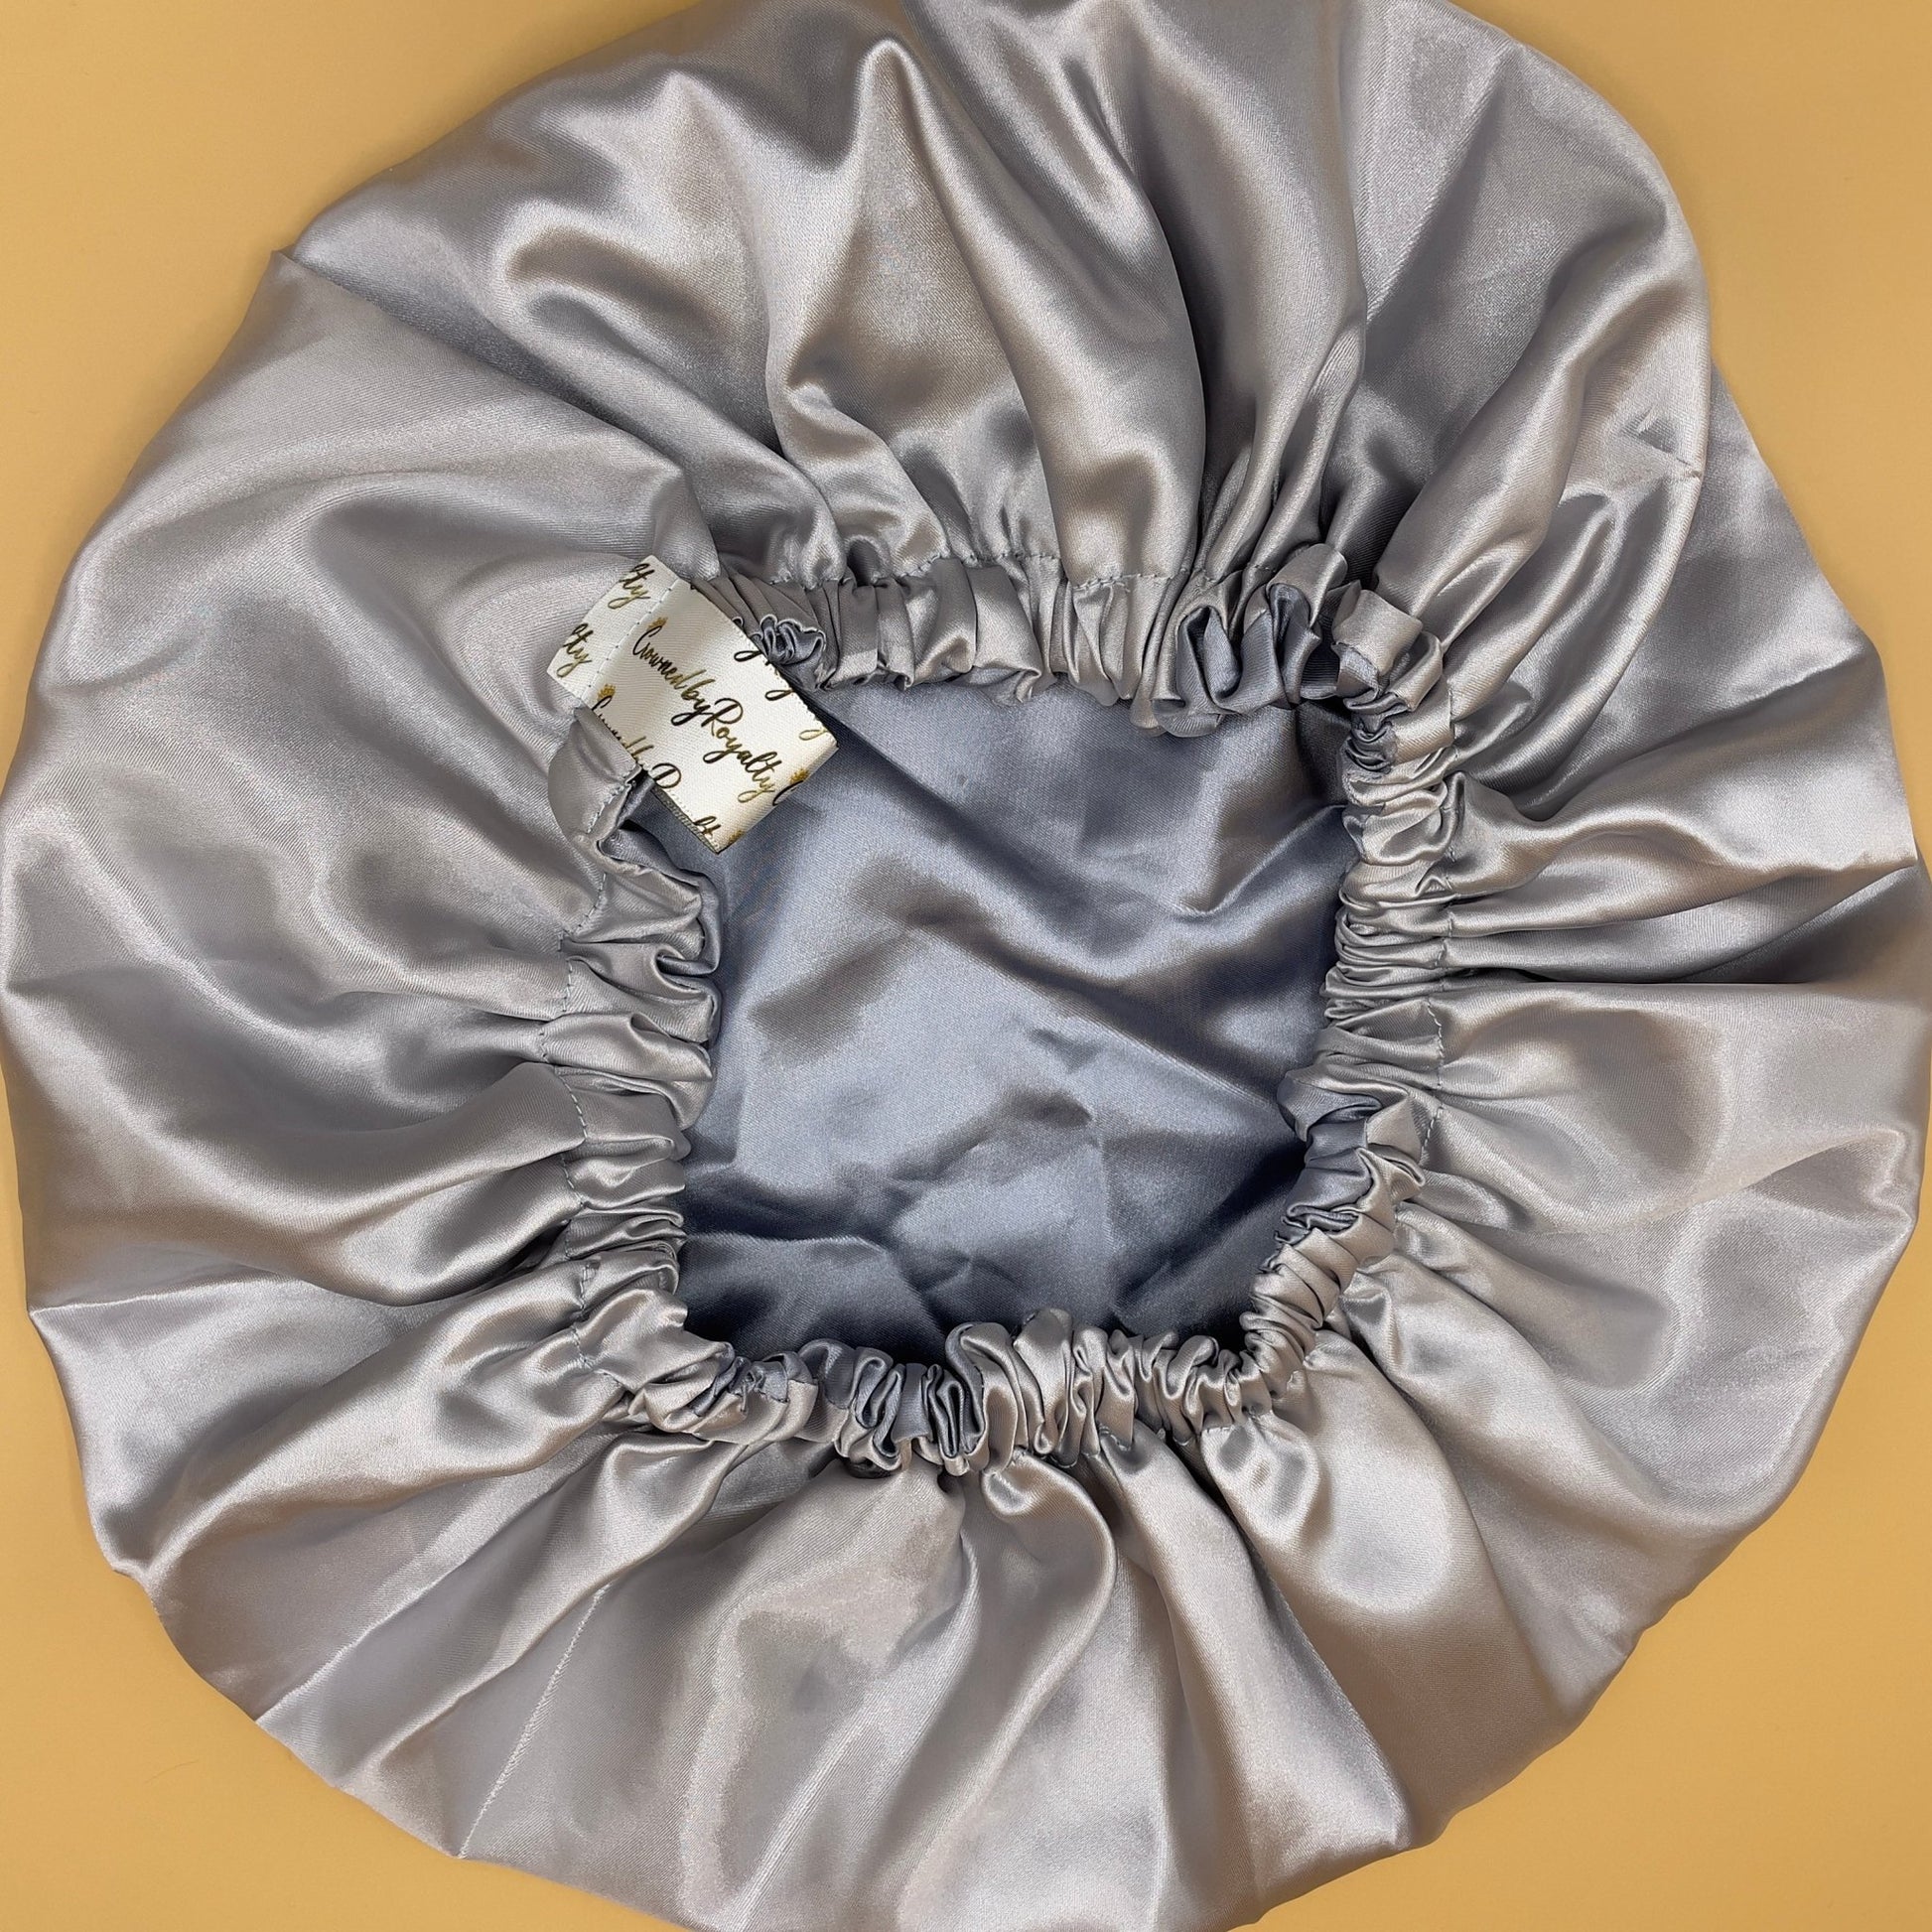 Twilight Silver Satin Bonnet - Crowned by Royalty